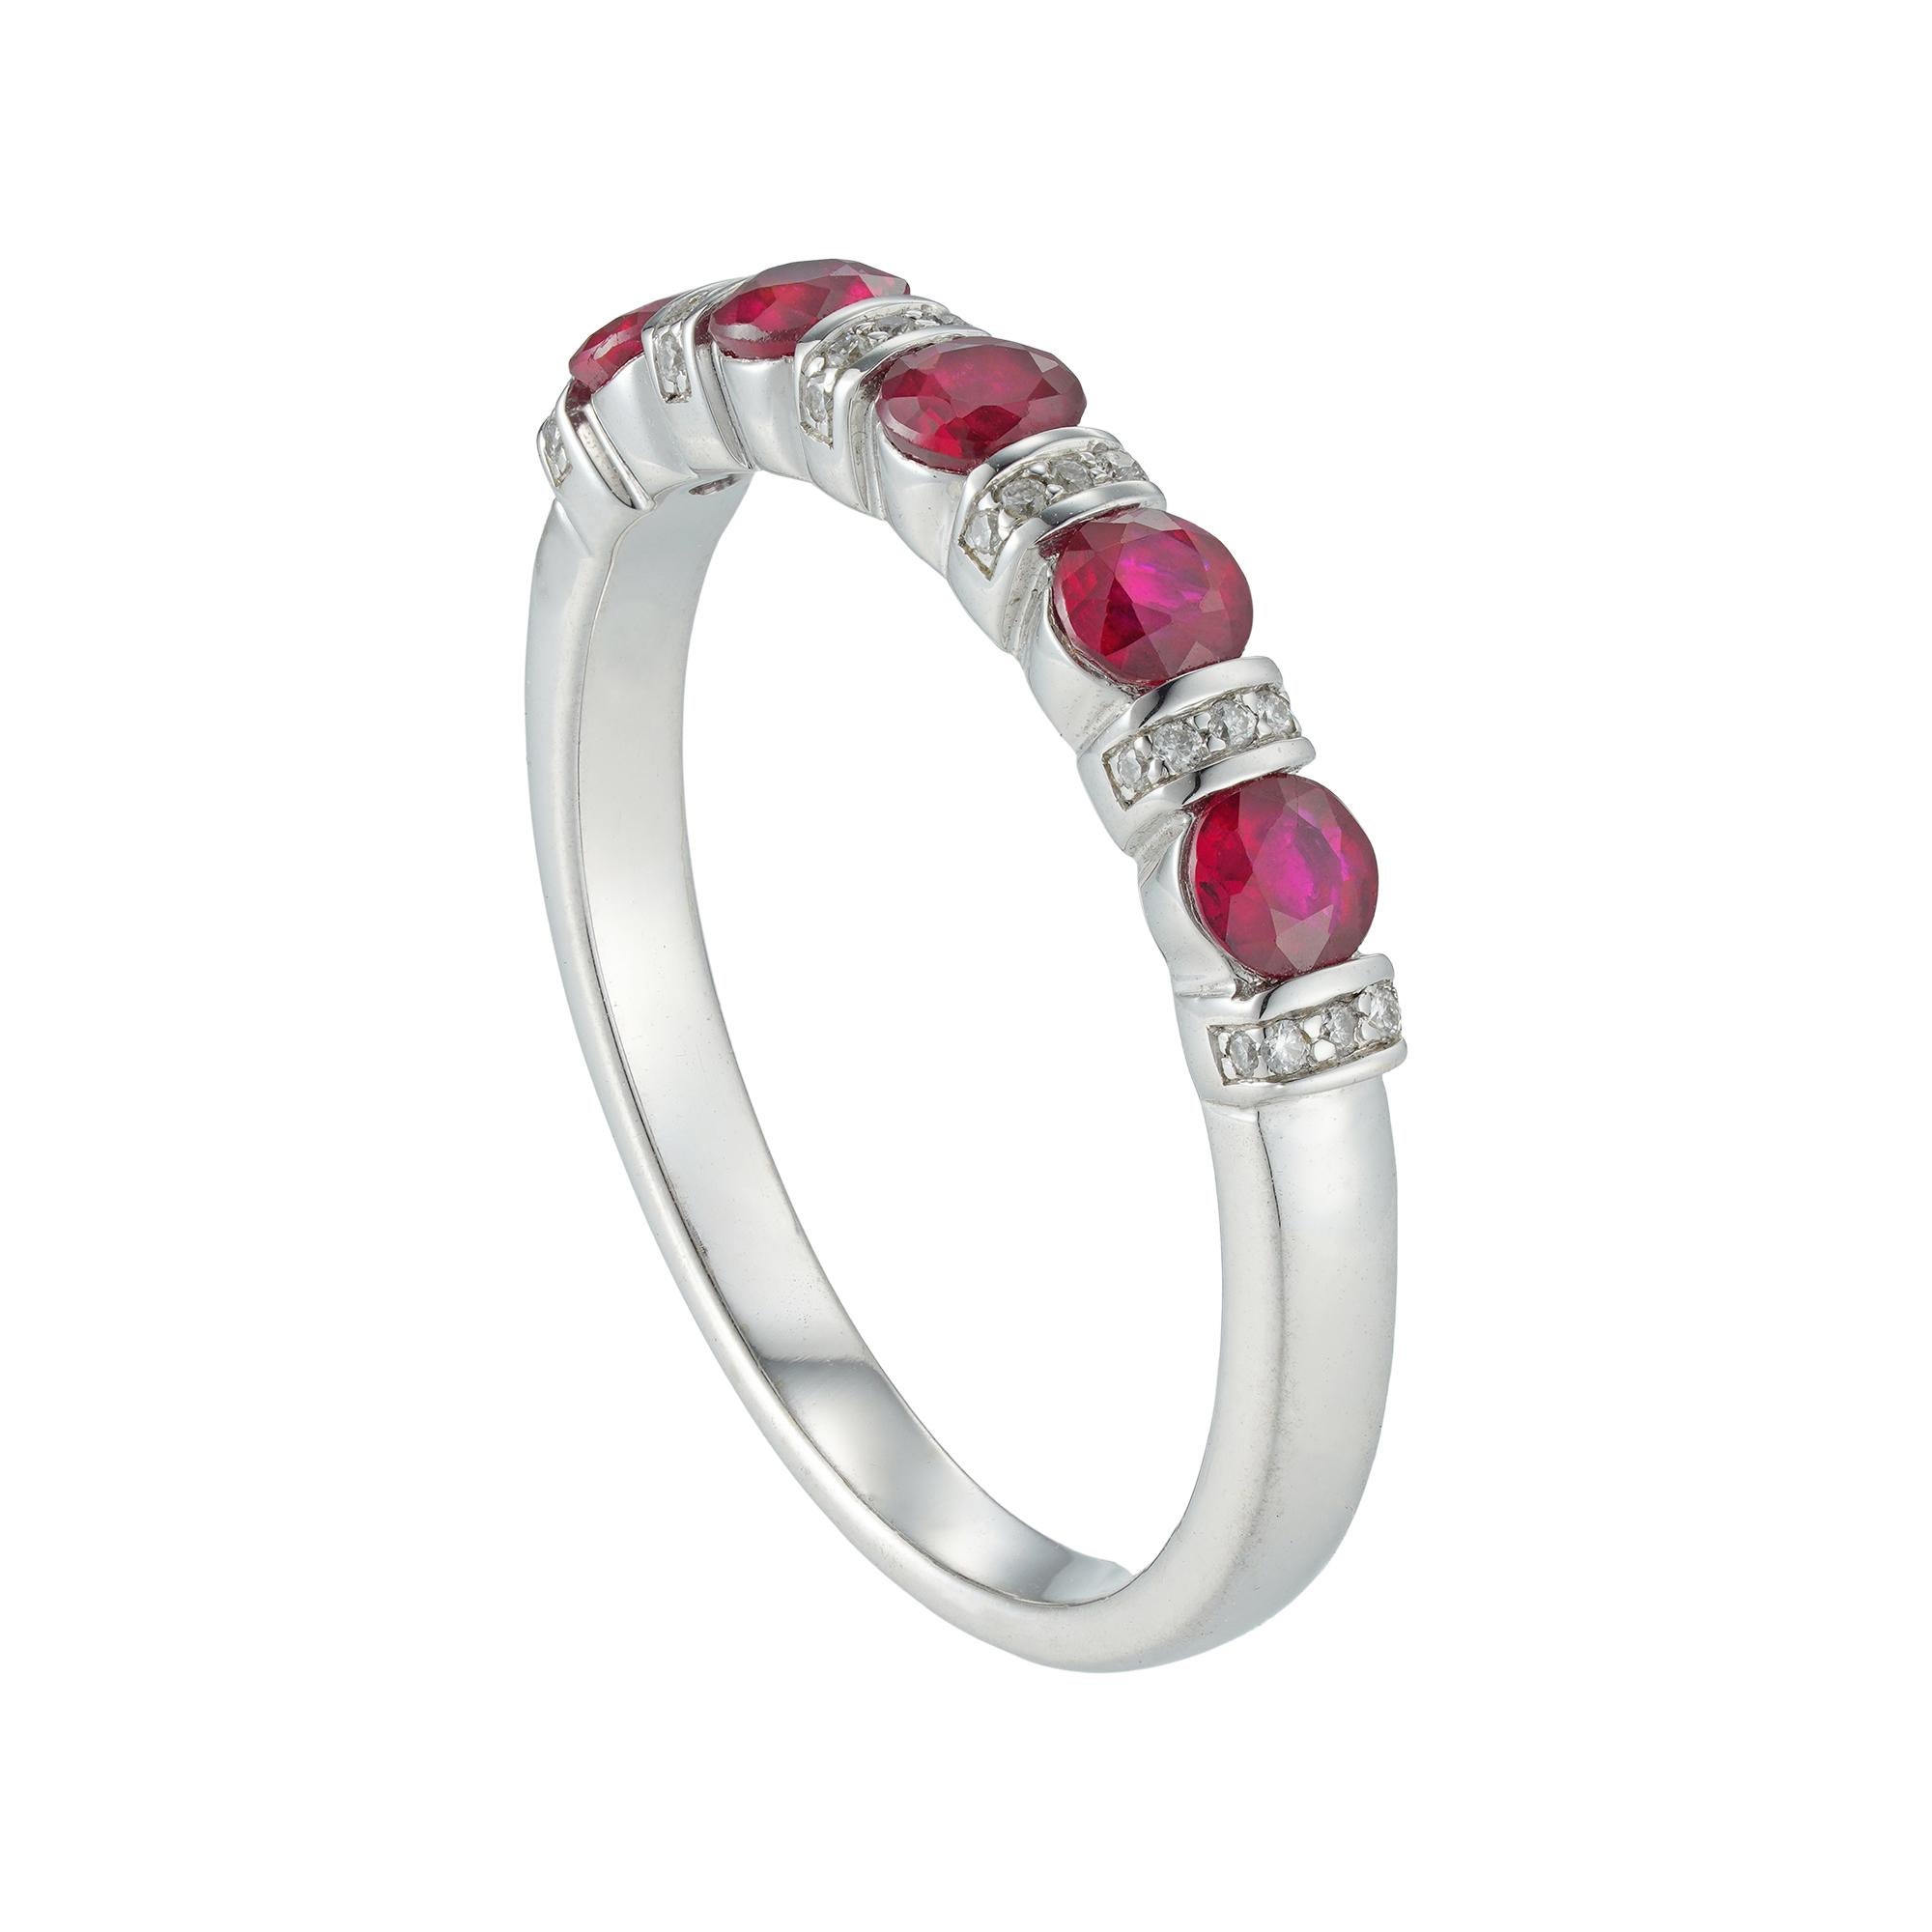 A ruby and diamond half eternity ring, consisting of five round brilliant-cut rubies weighing 0.68 carats in total, tension-set between six round brilliant-cut diamond-set sections, the diamonds weighing 0.06 carats in total, all mounted in white